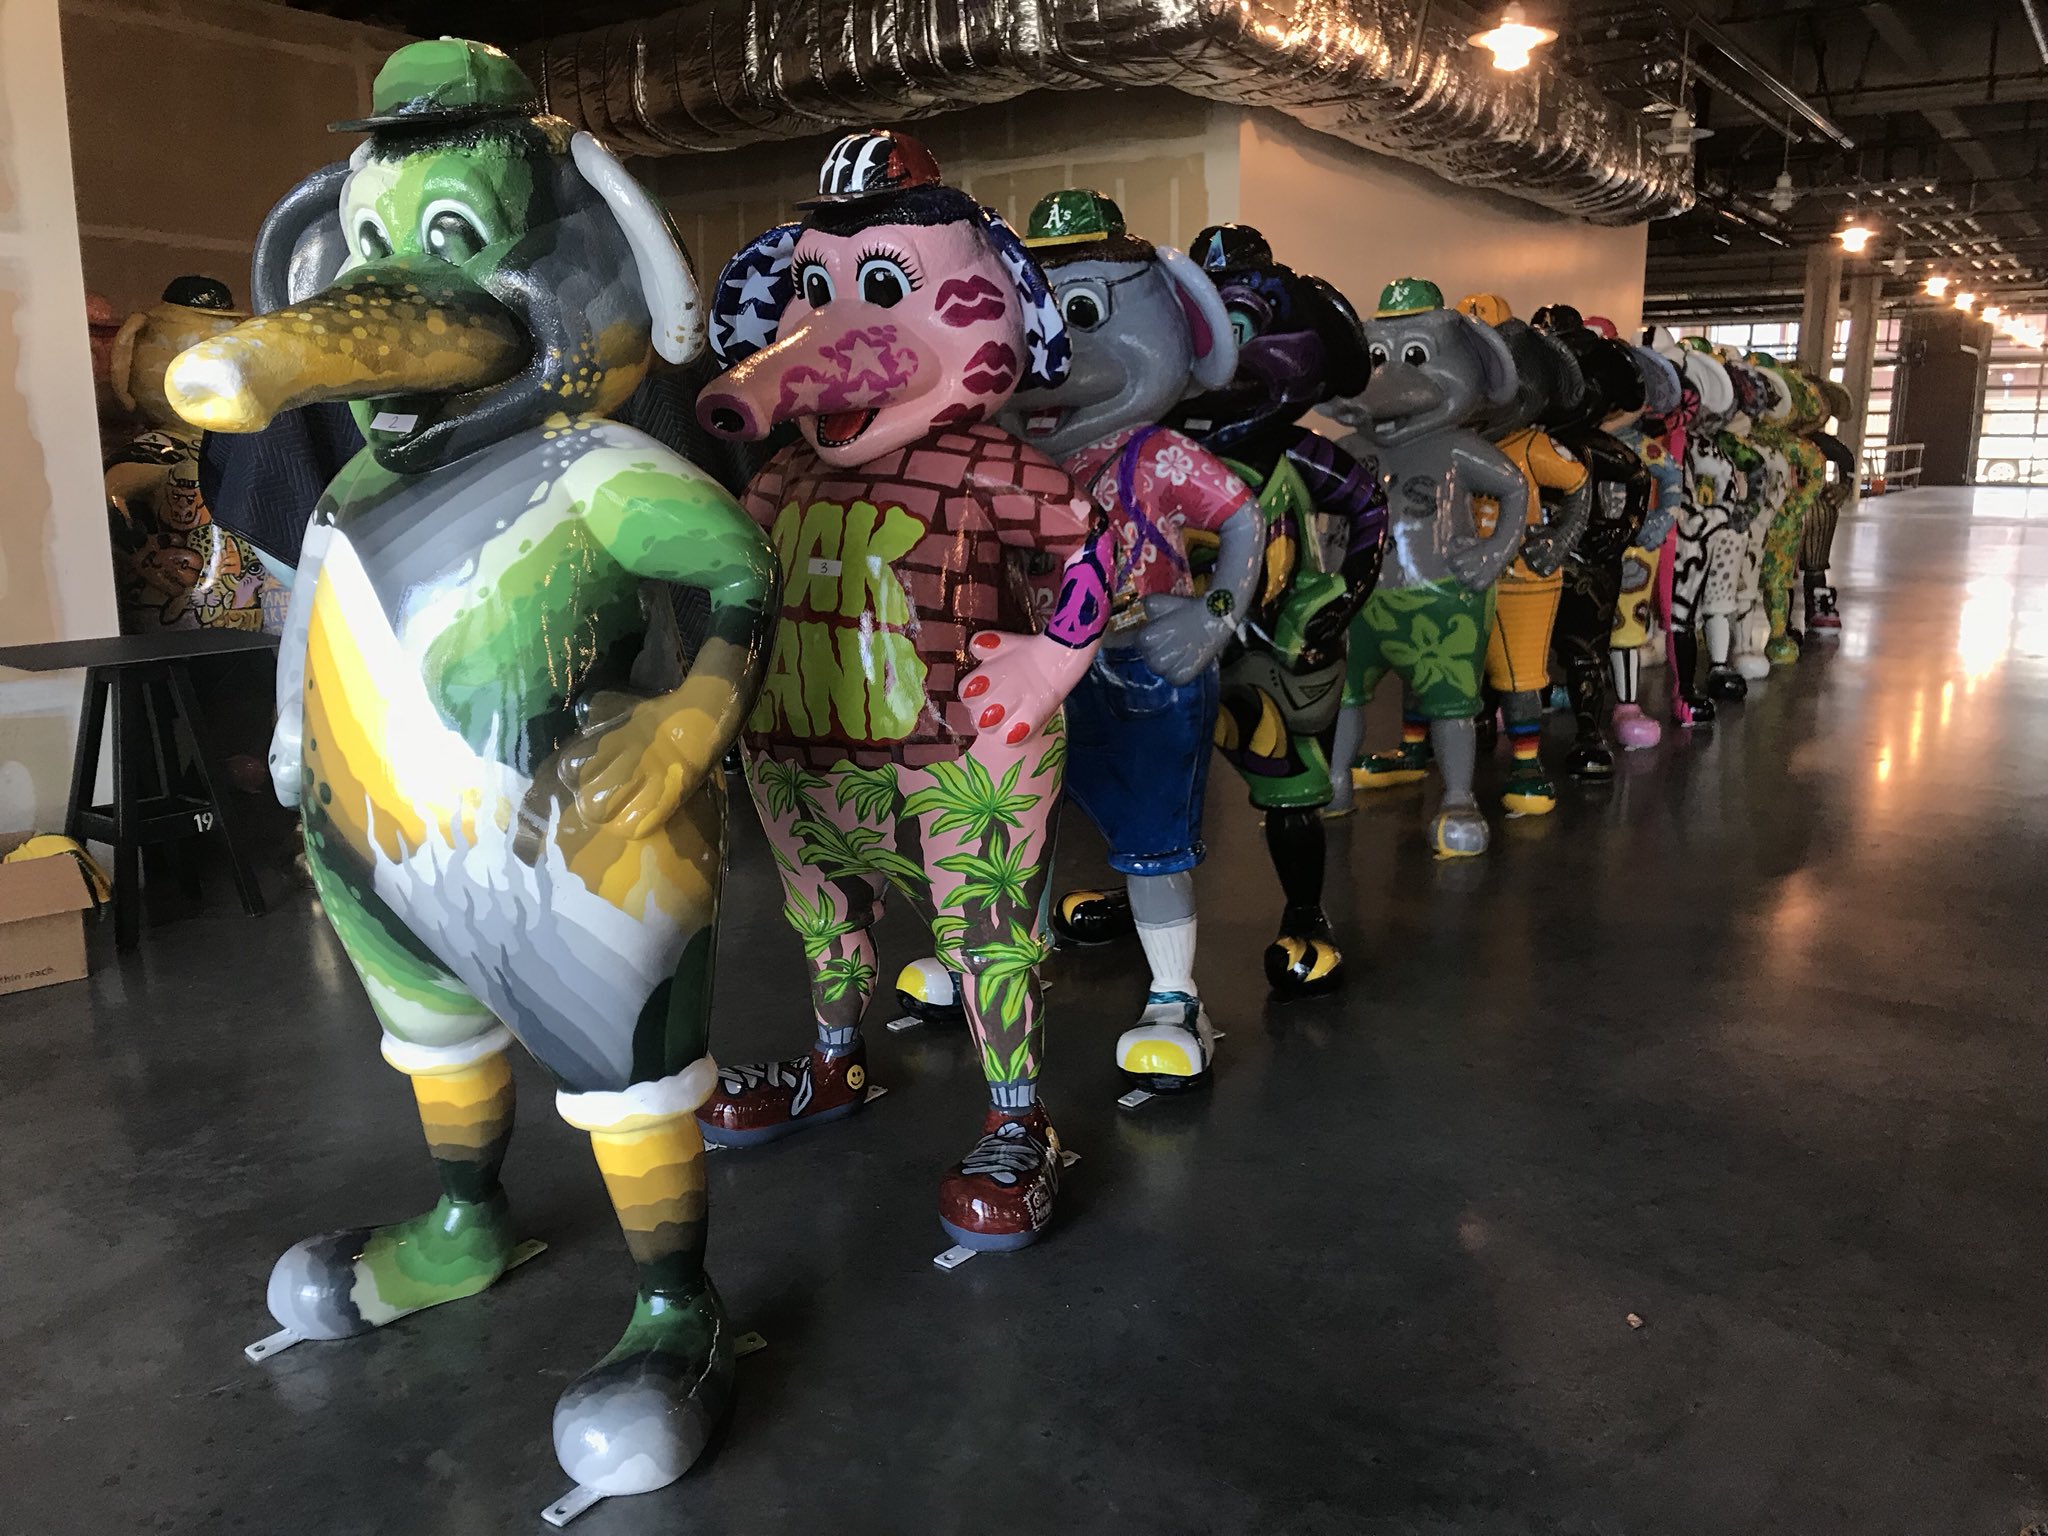 Where to find Oakland A's Stomper statues in Oakland